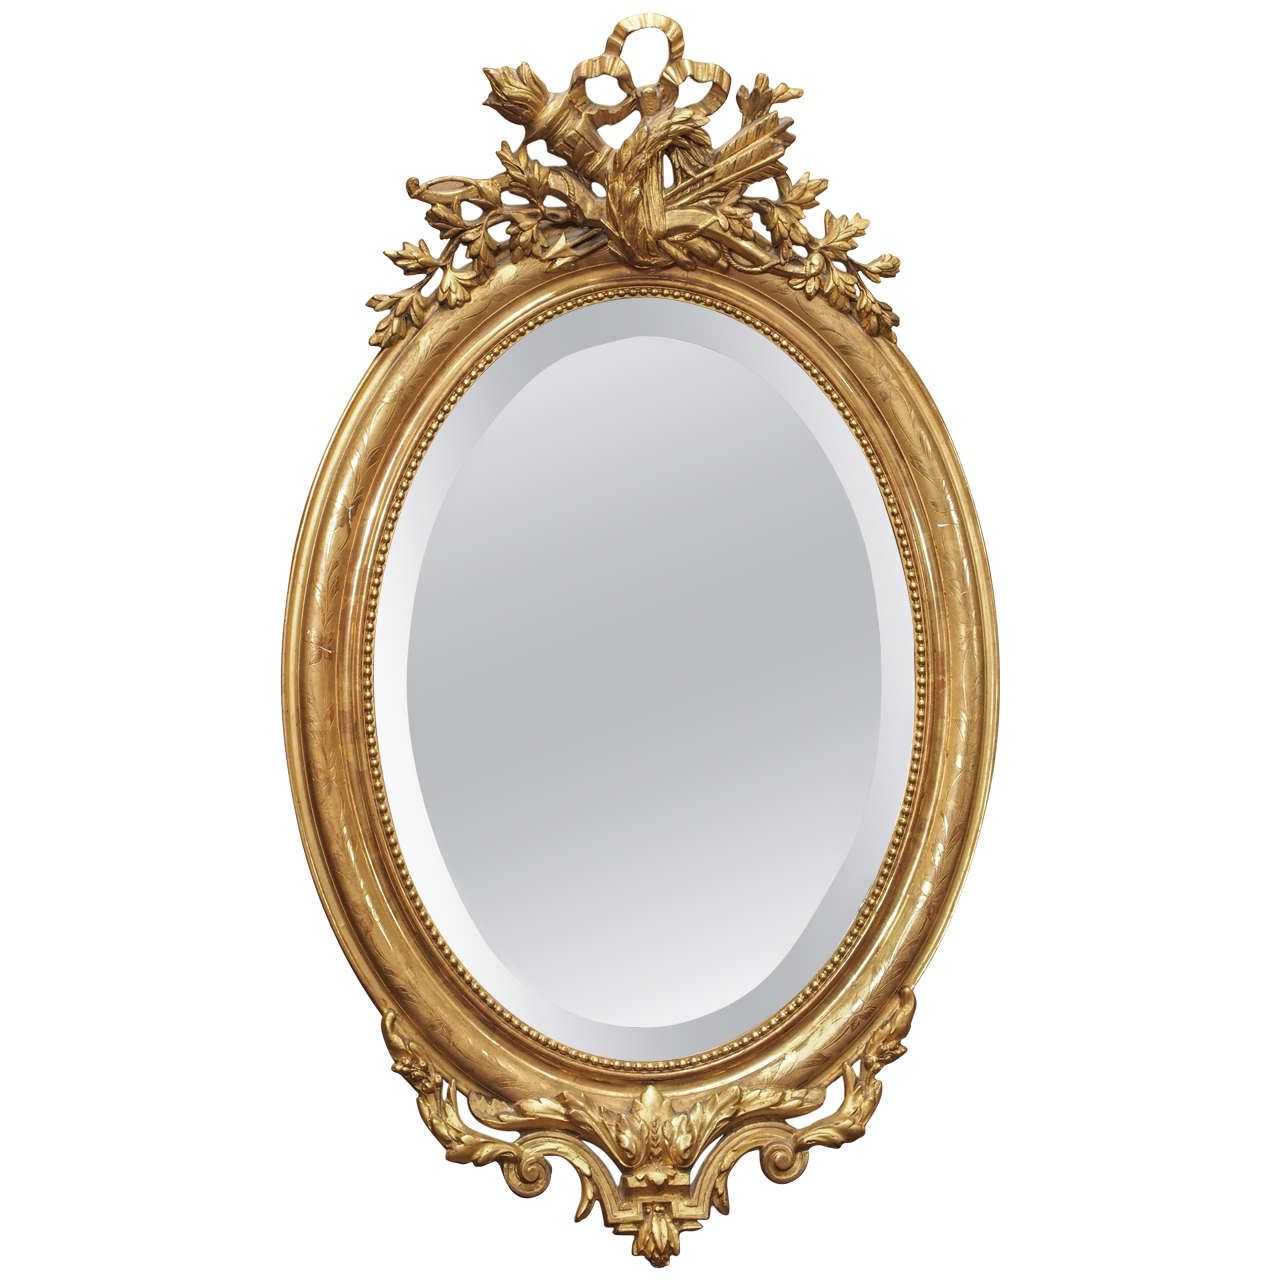 Lovely Oval Antique French Gold Beveled Mirror Circa 1850 At 1stdibs With Regard To Antique Gold Scallop Wall Mirrors (View 6 of 15)